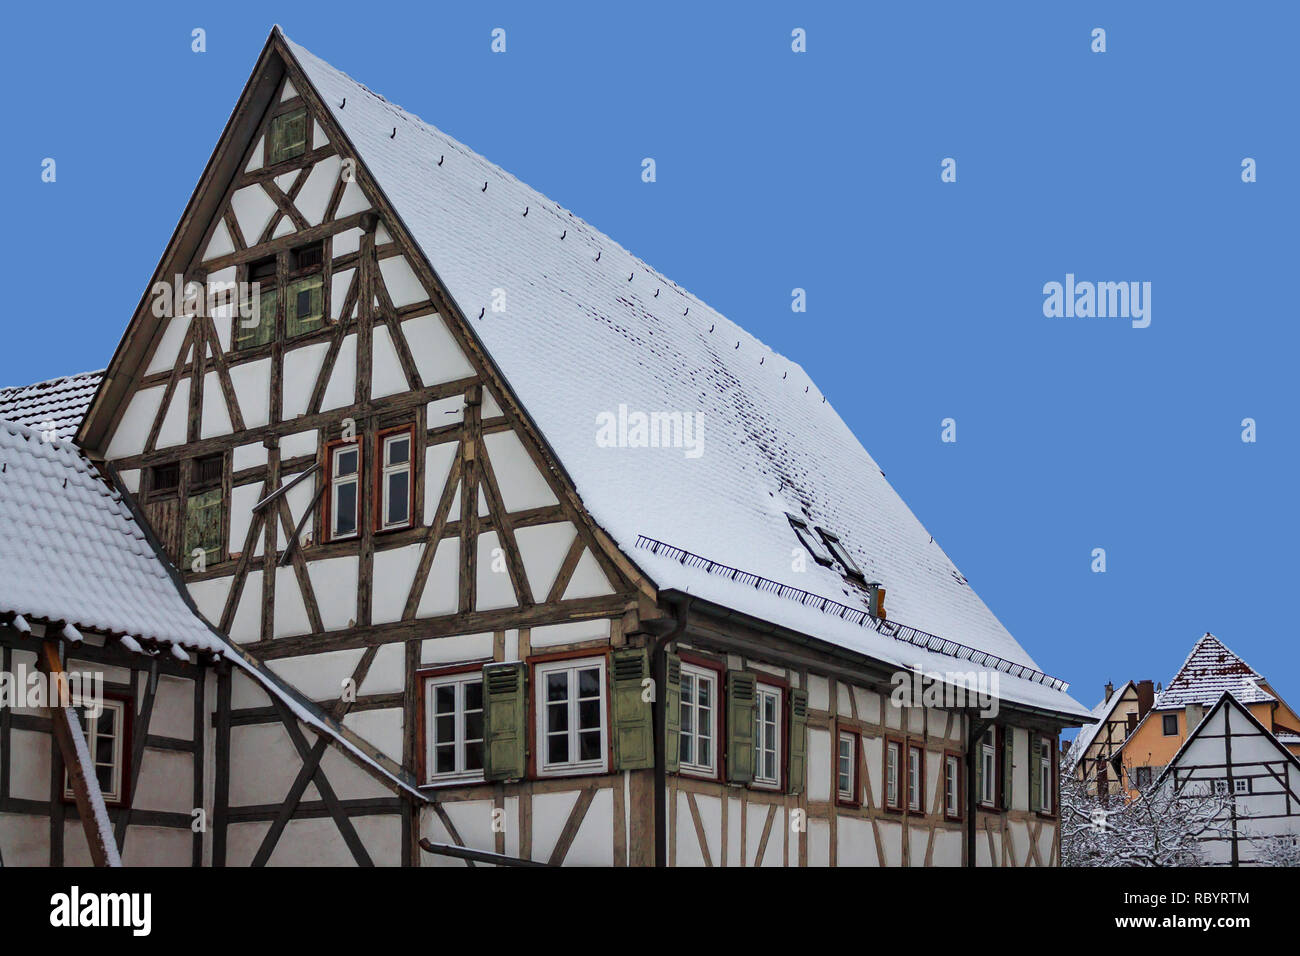 Sindelfingen, Germany, Jan 11th, 2019: Classic renaissance style architecture cityscape. Italian or french or german old fashioned medieval architectu Stock Photo